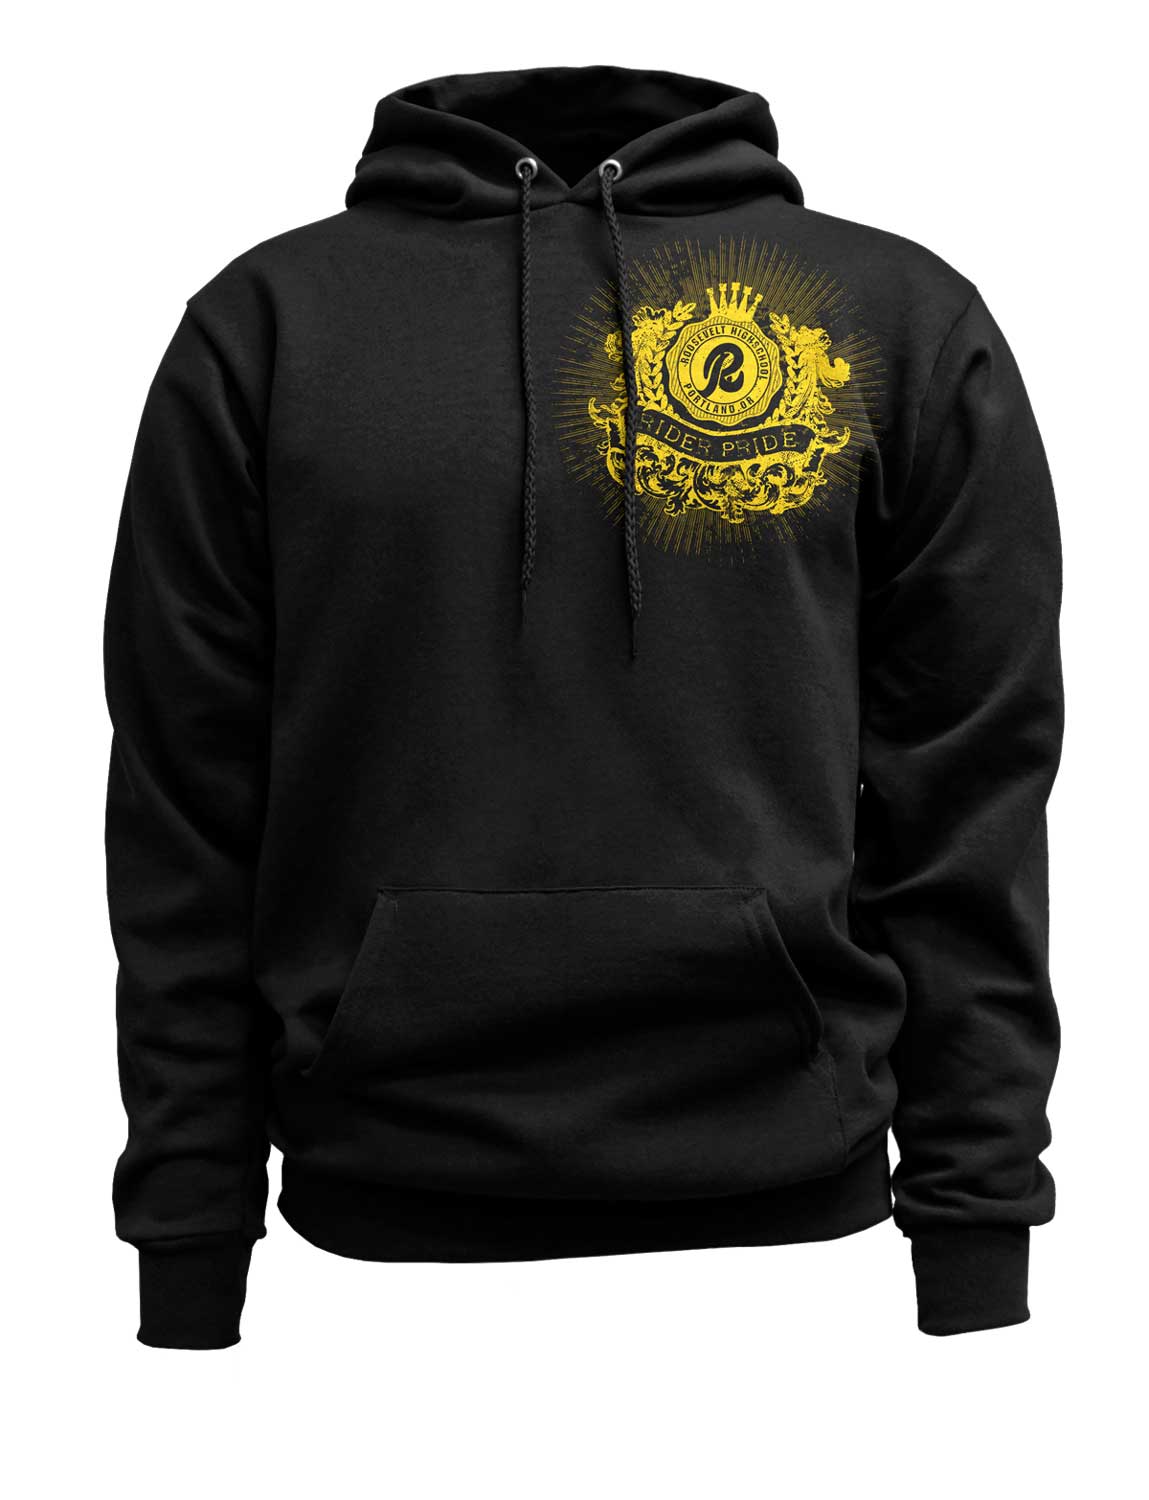 Black custom printed hoodies with a yellow logo on top right that say Riders Pride